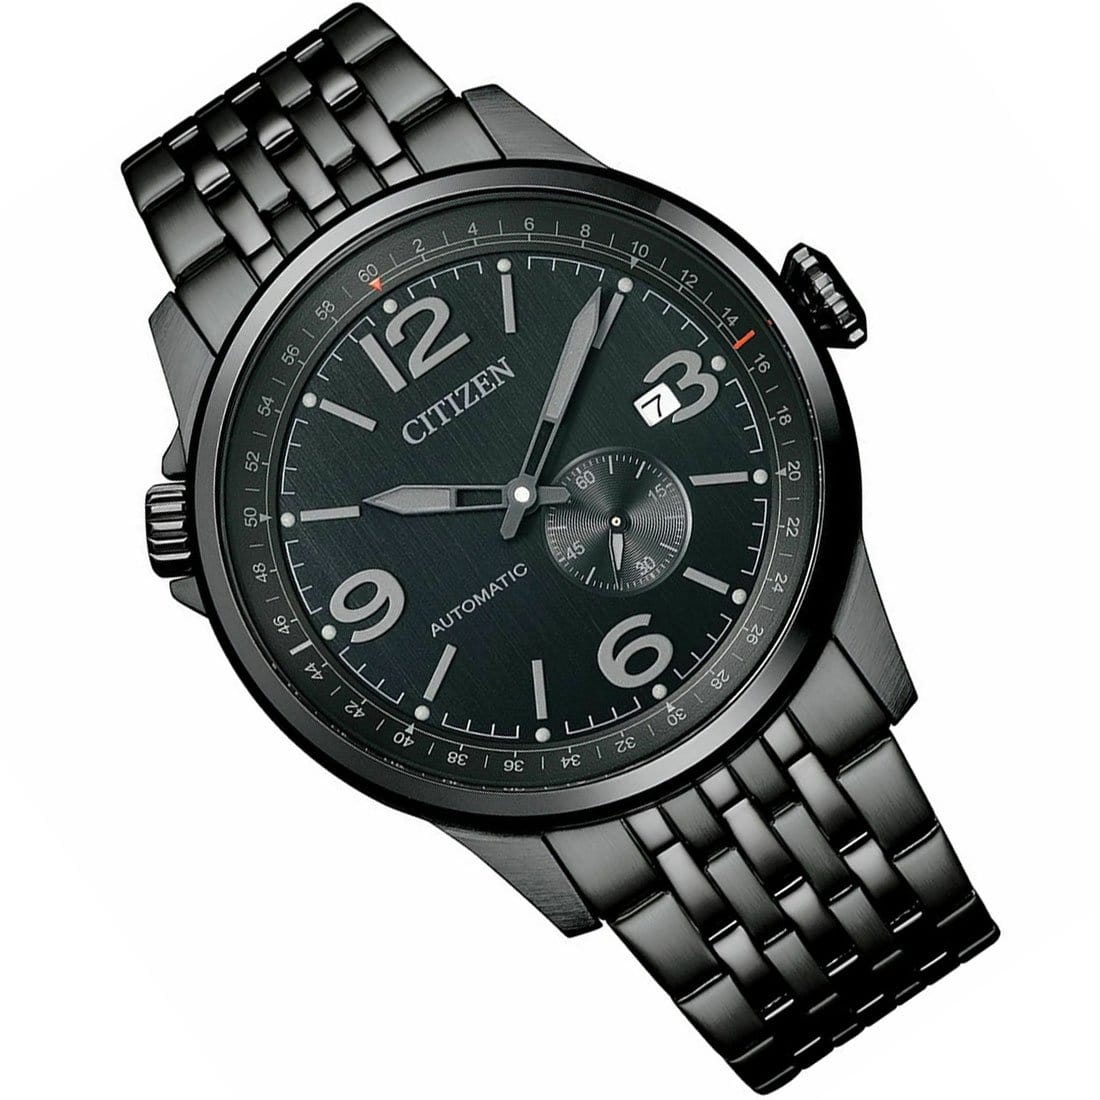 NJ0147-85E Citizen Pilot Automatic Black Dial Analog Stainless Steel Watch